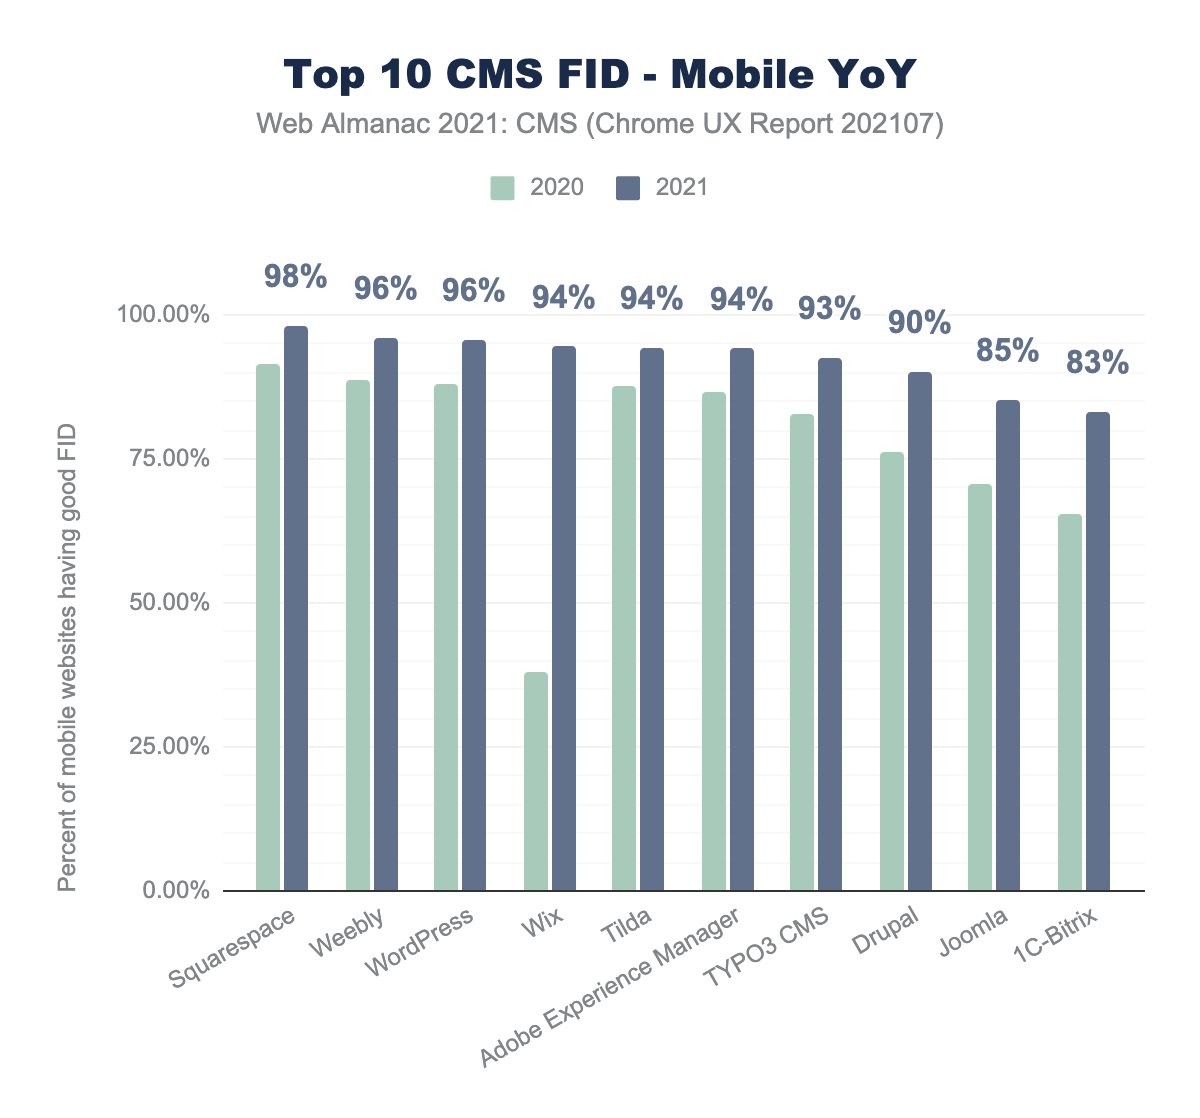 Top 10 CMSs FID performance for mobile views year-over-year.